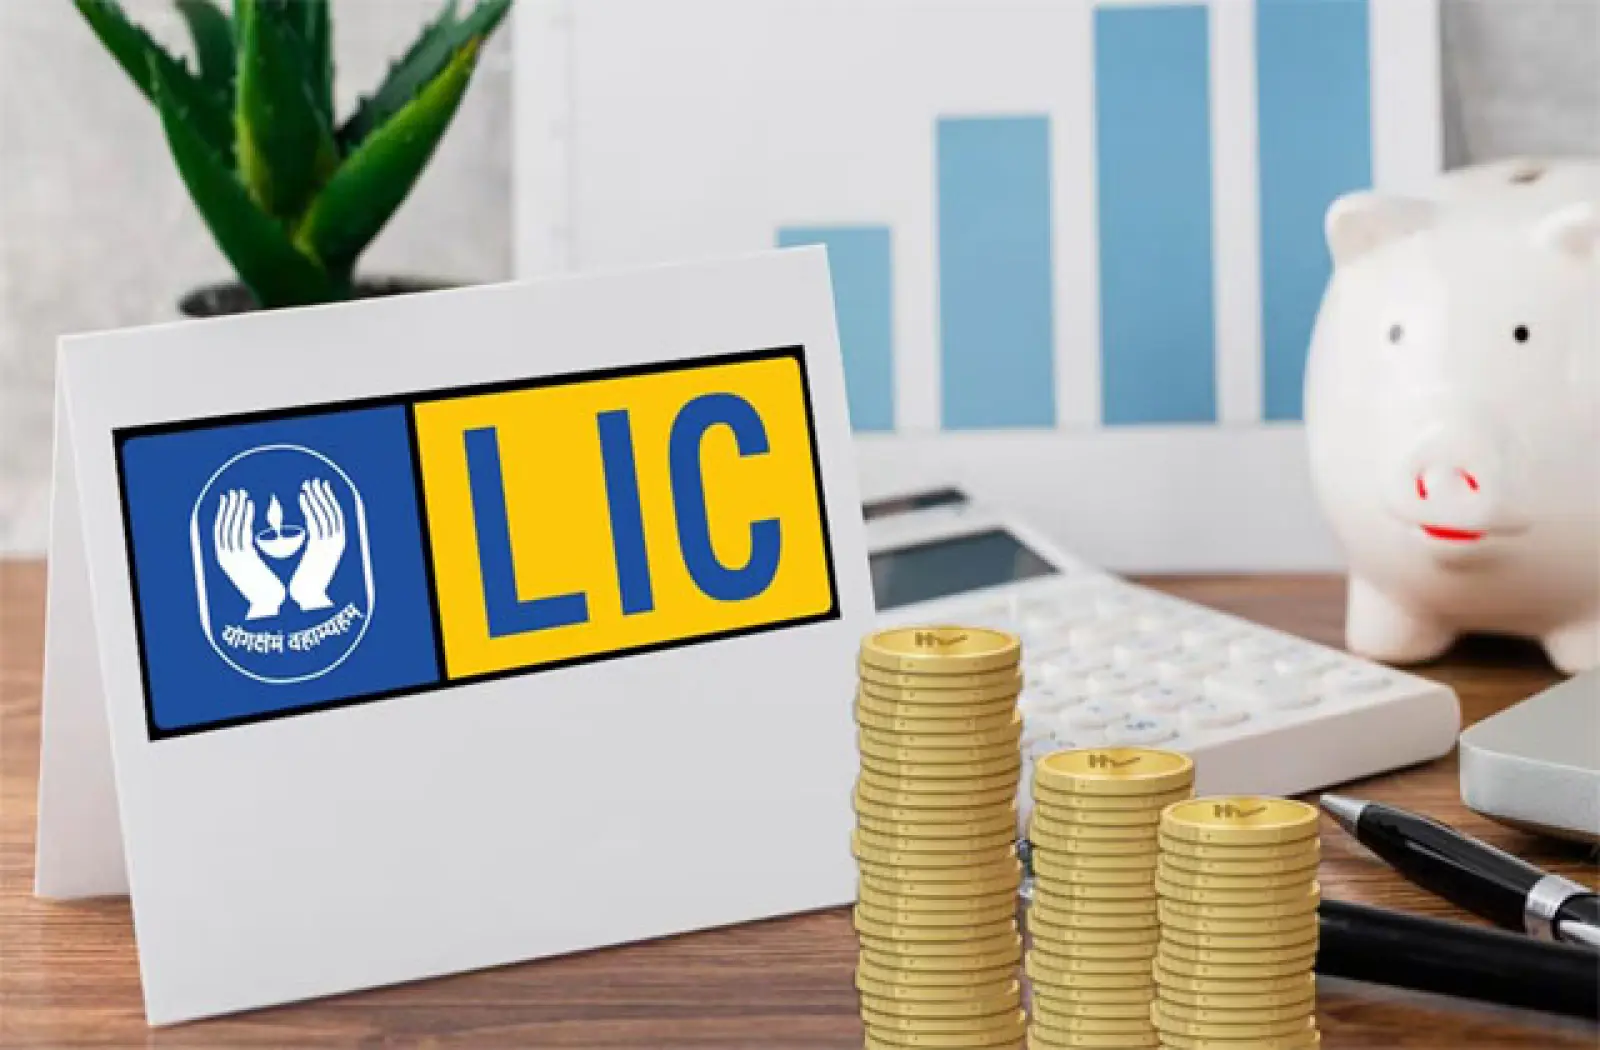 LIC will play an important role in achieving 'Insurance for All' by 2047: LIC Chairman Siddharth Mohanty